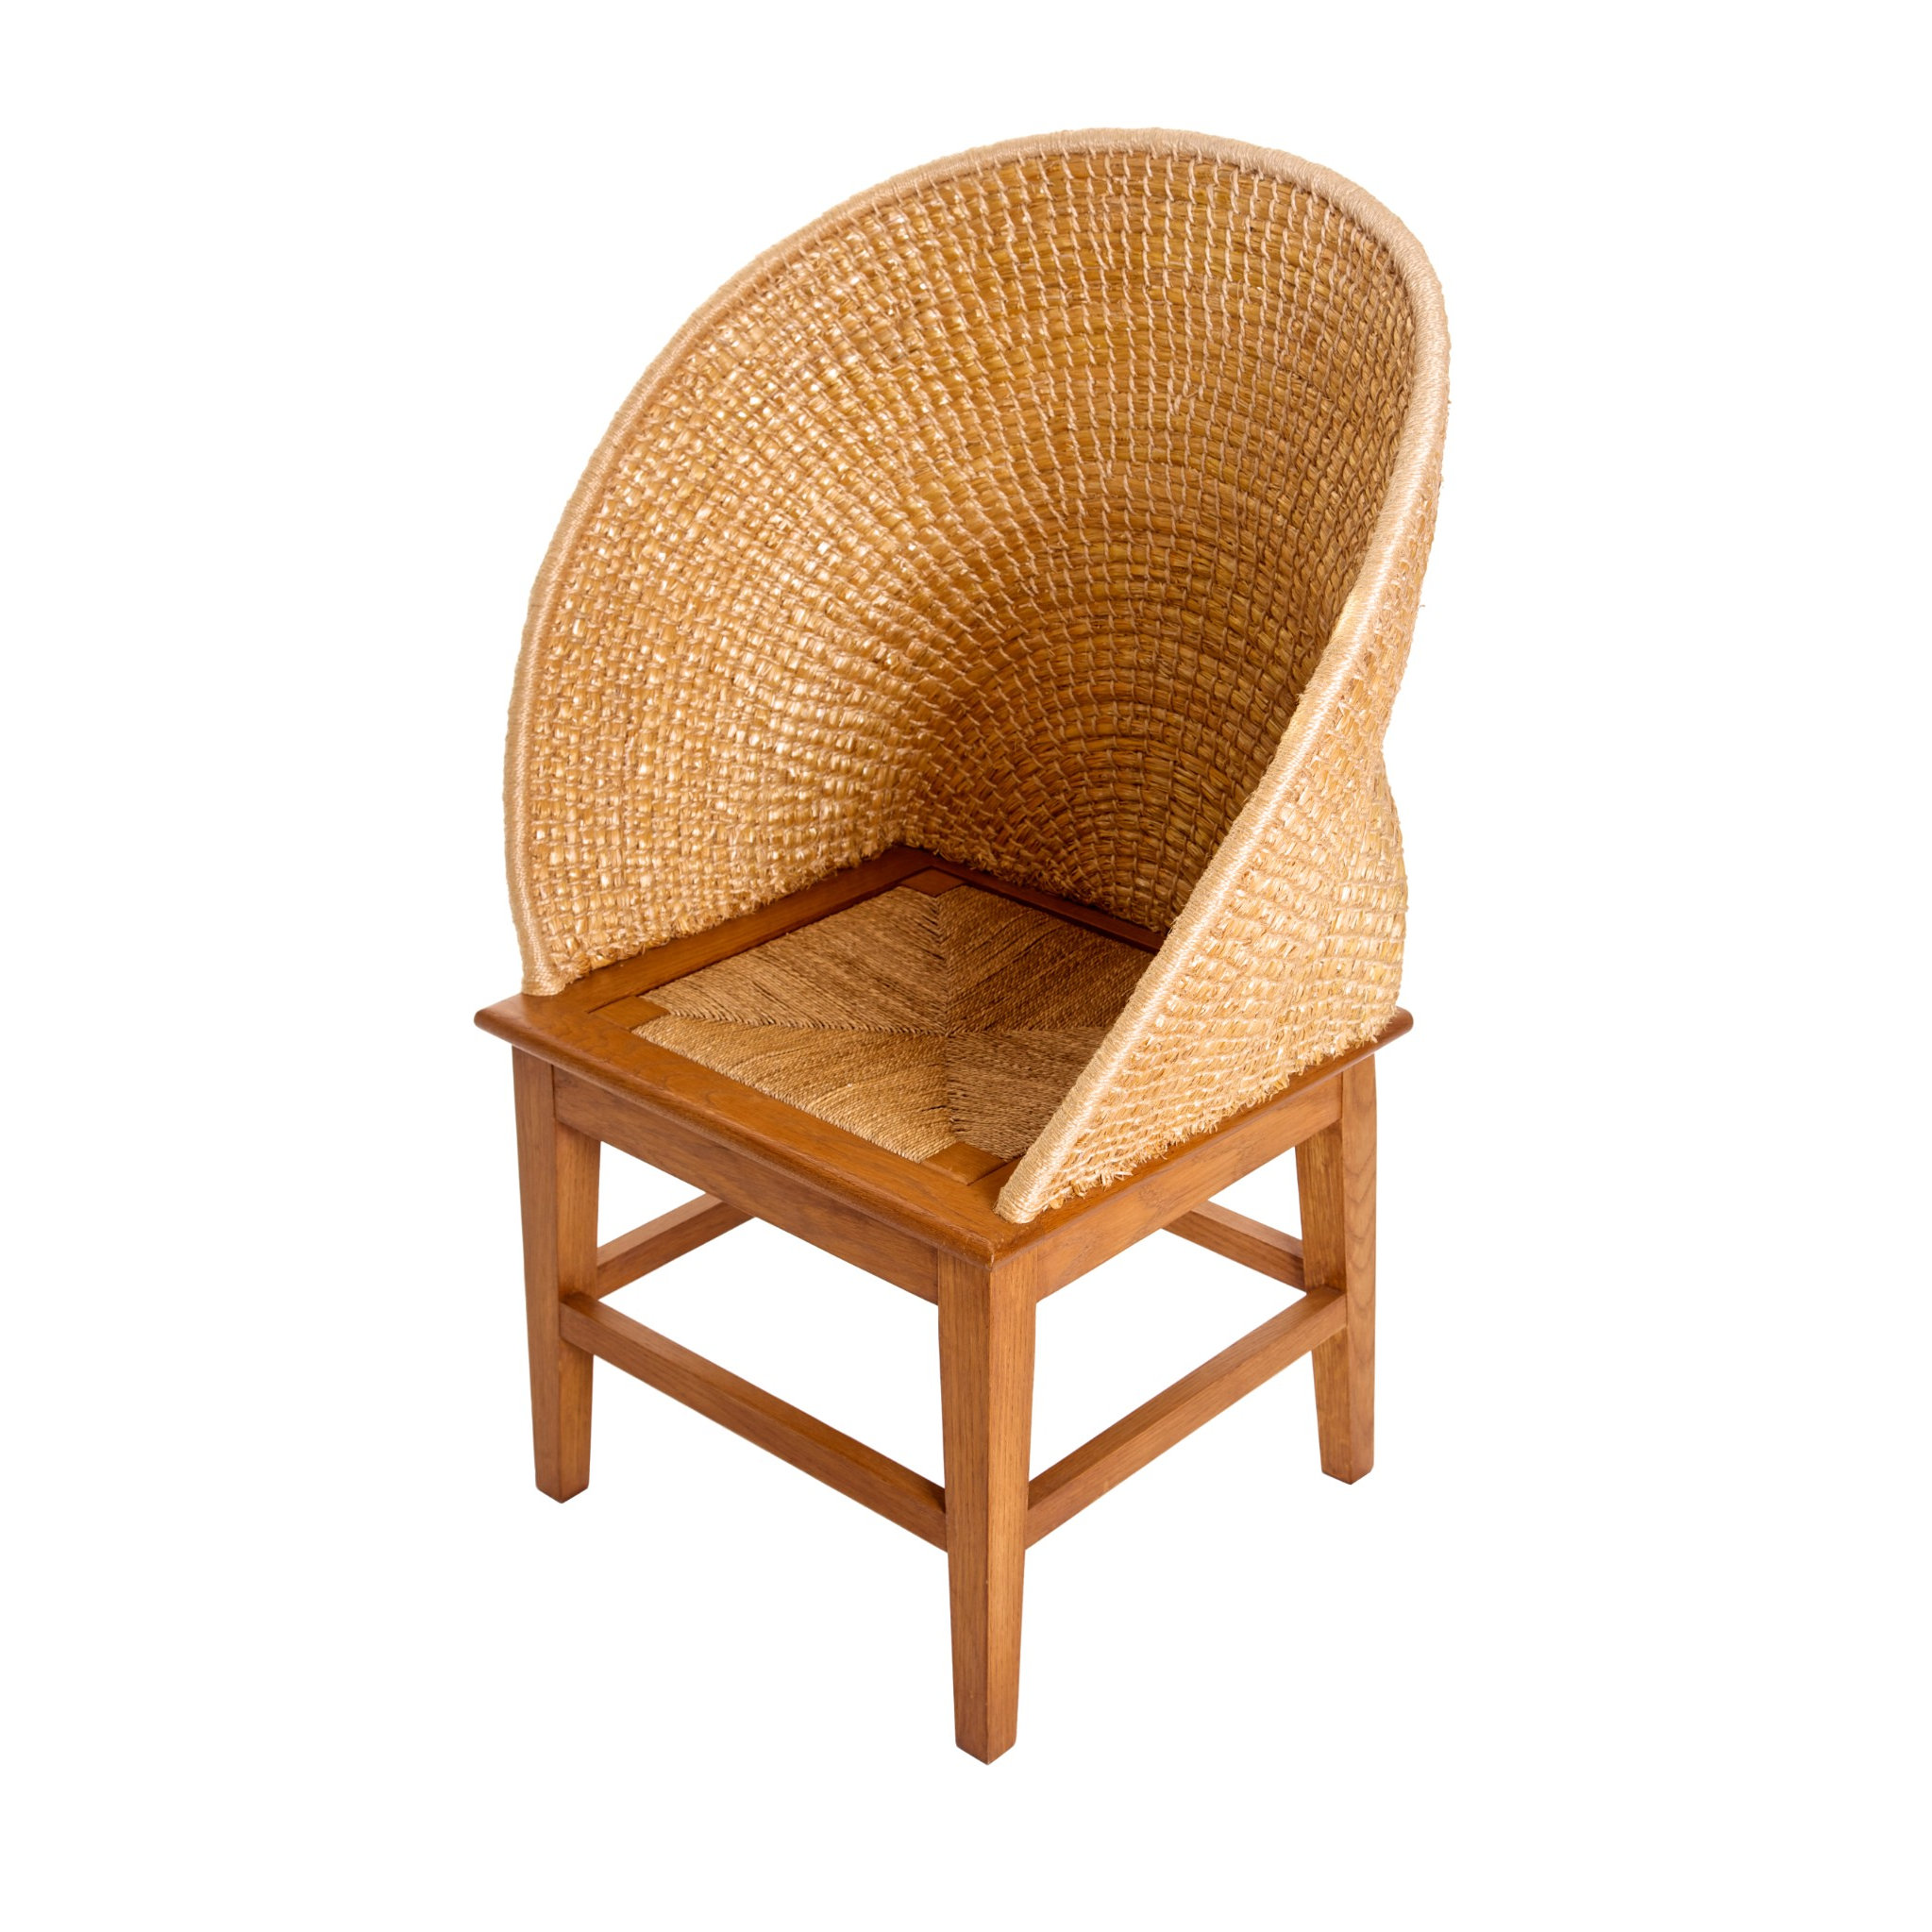 The Round-Backed Chair | Orkney Hand Crafted Furniture